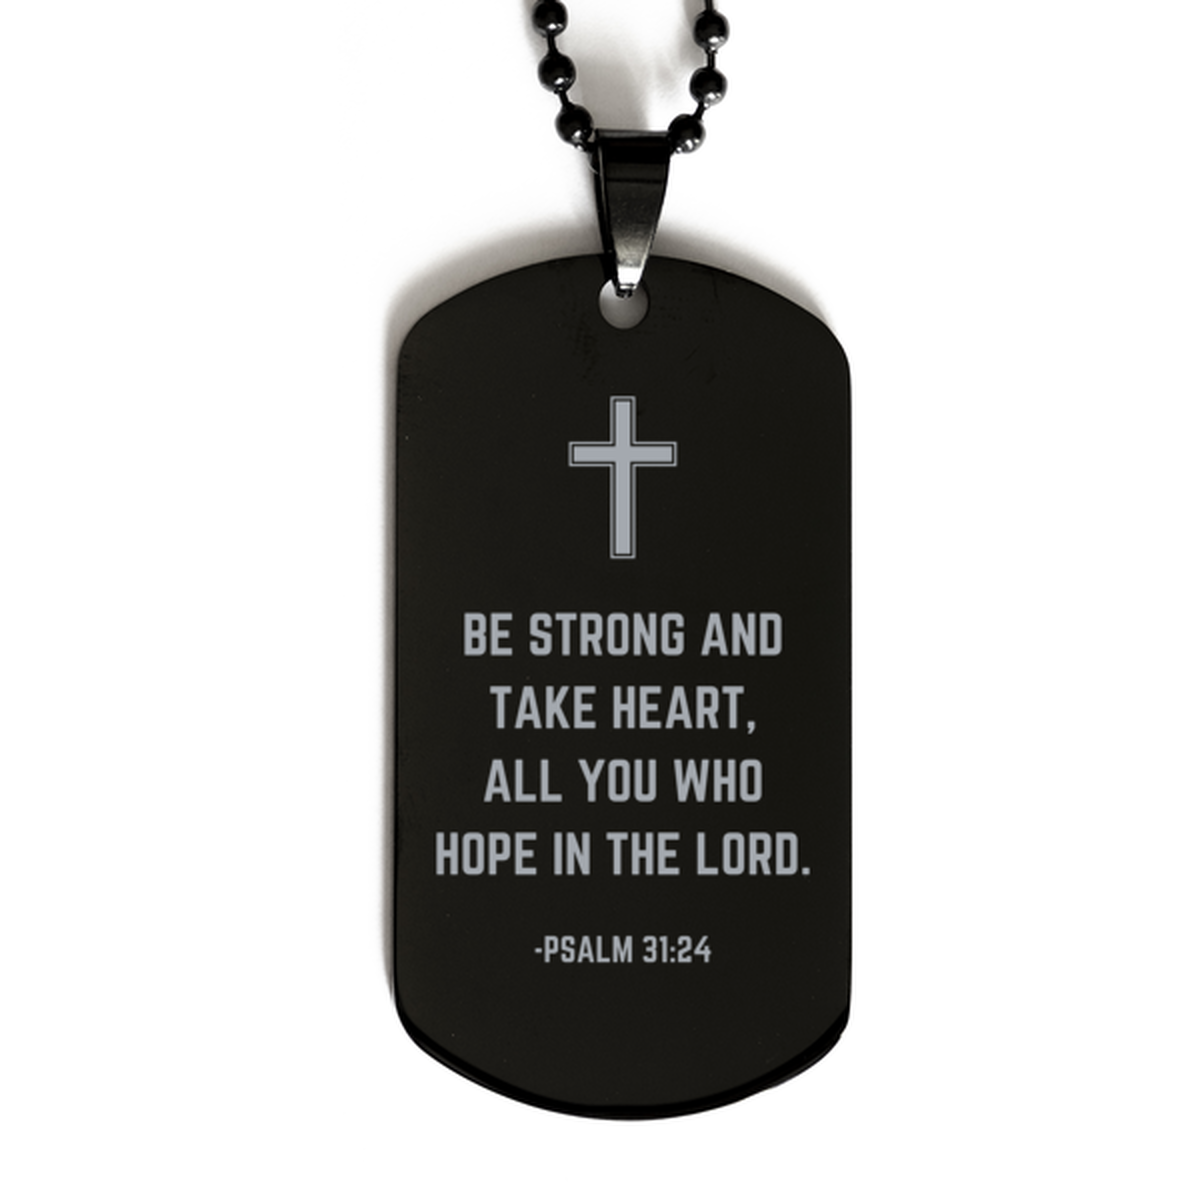 Baptism Gifts For Teenage Boys Girls, Christian Bible Verse Black Dog Tag, Be strong and take heart, Confirmation Gifts, Bible Verse Necklace for Son, Godson, Grandson, Nephew